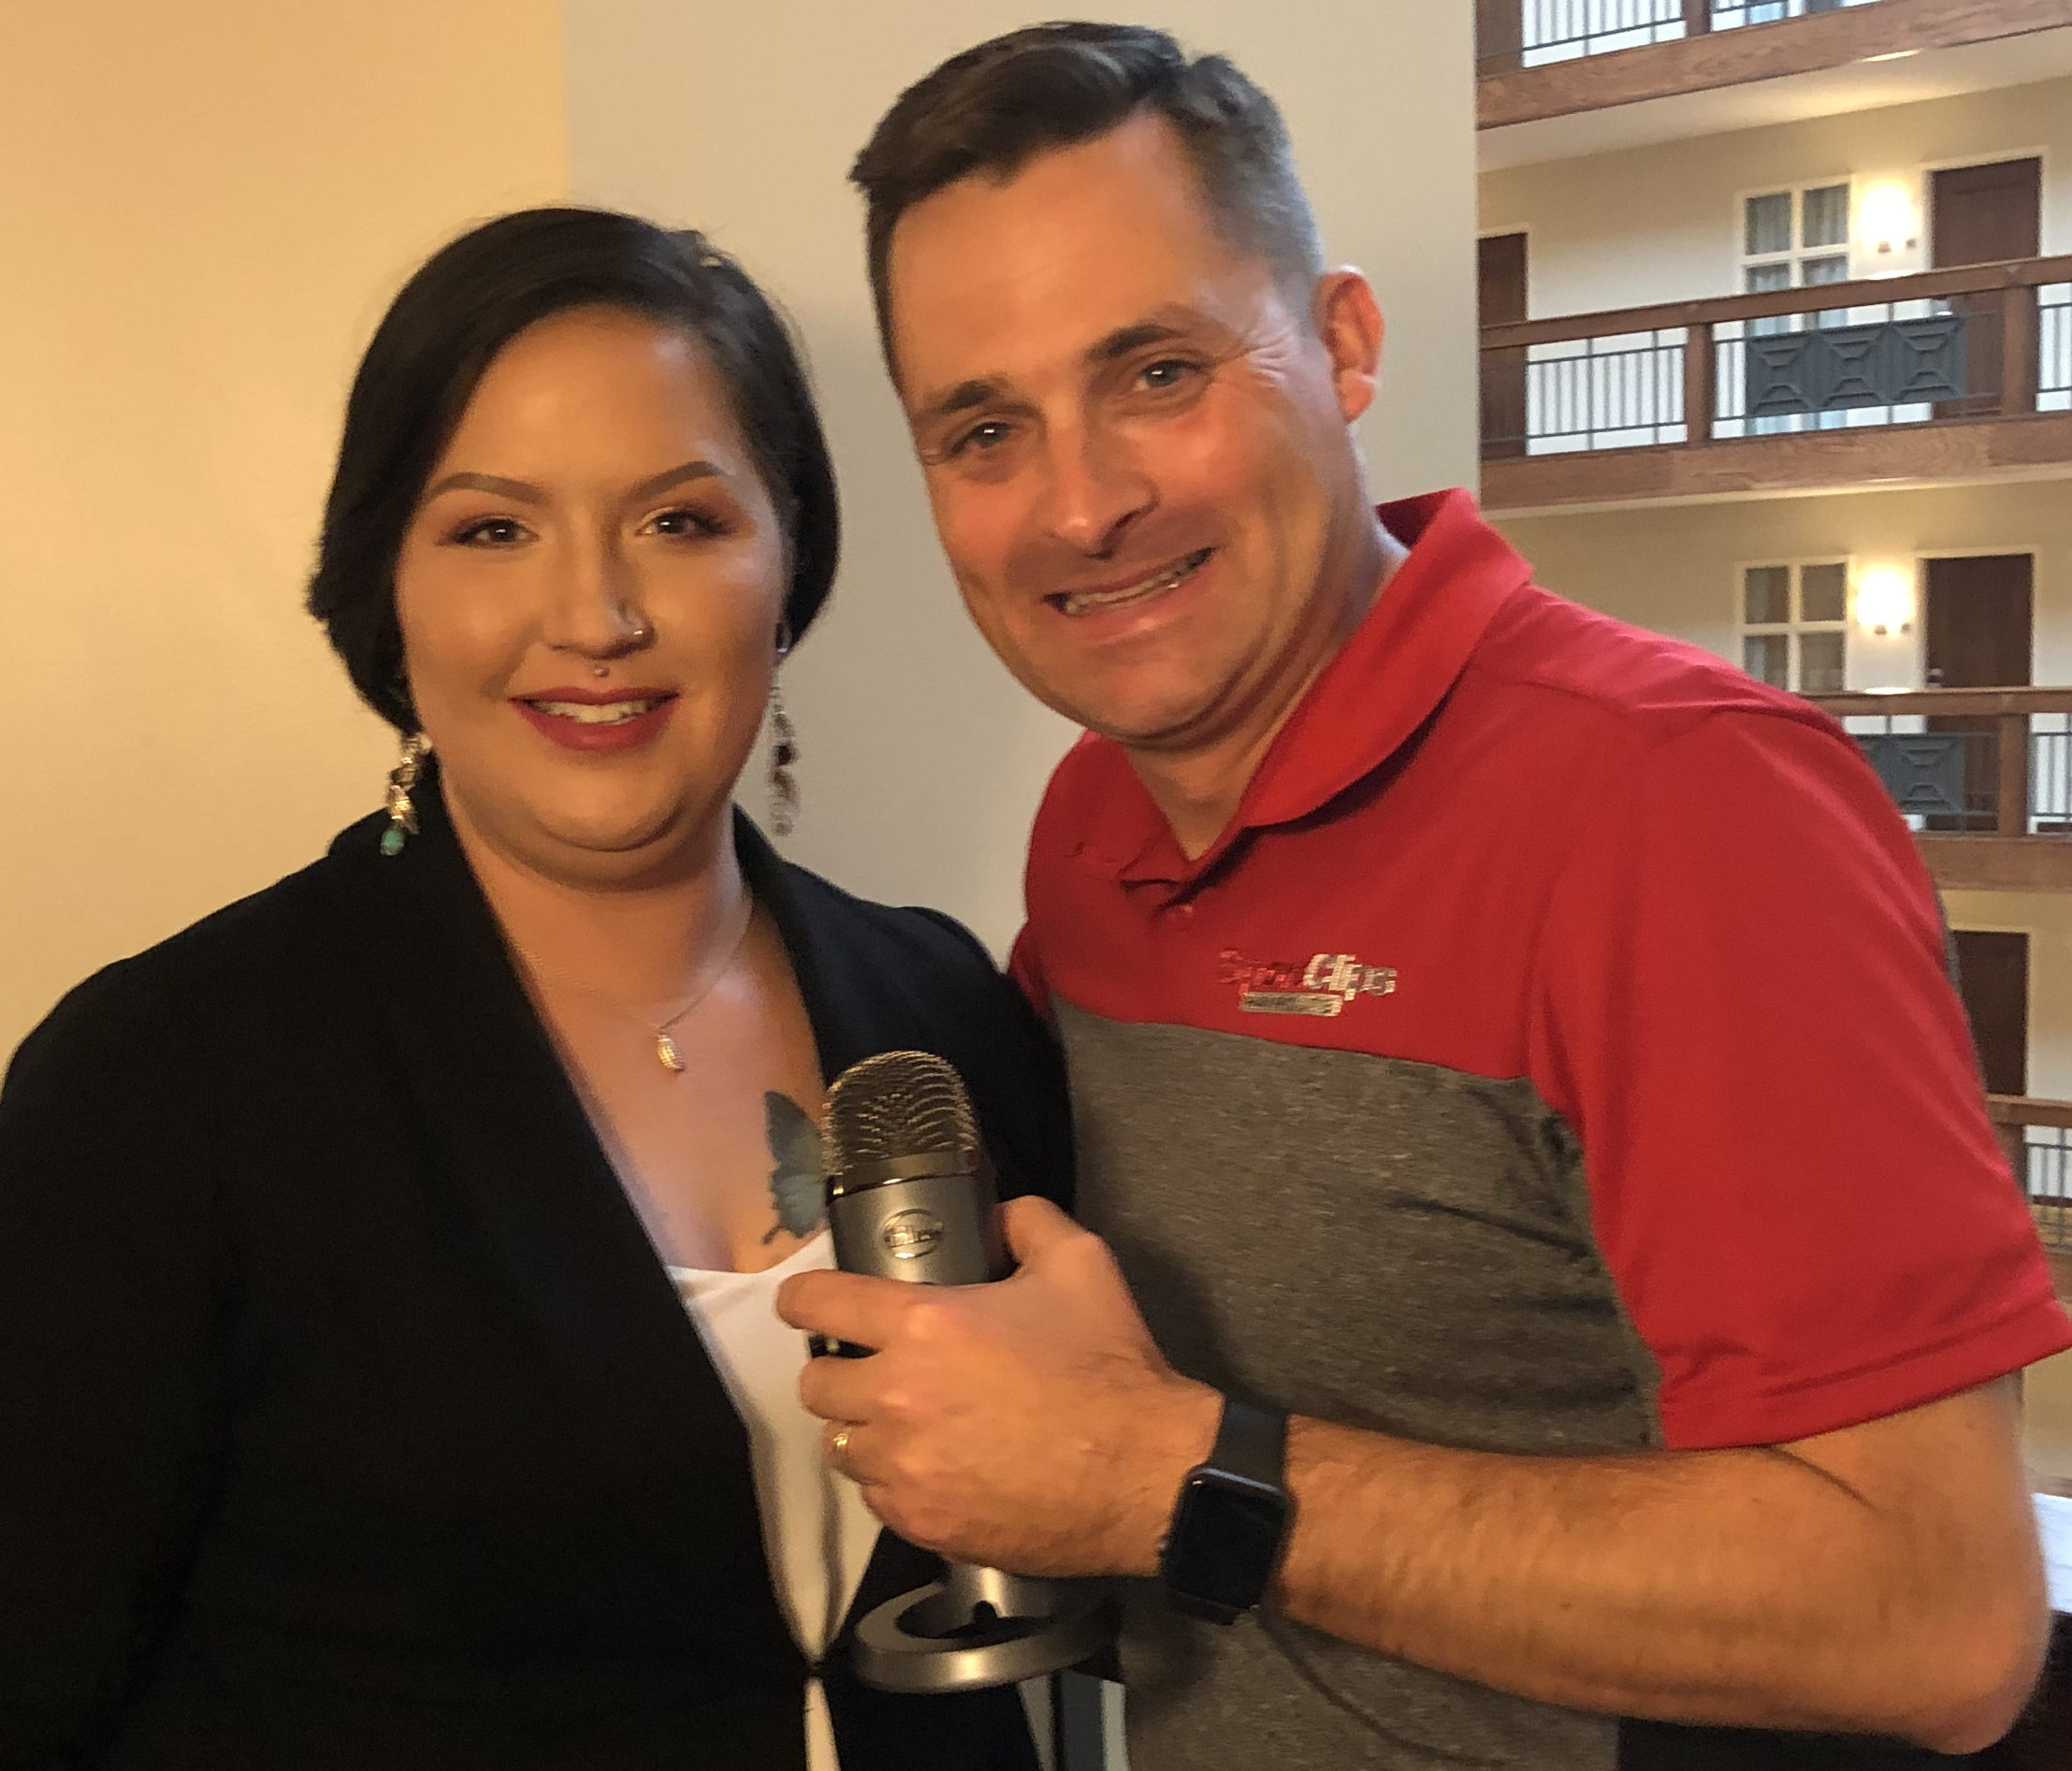 Chad Jordan and Colleen Foster holding a microphone